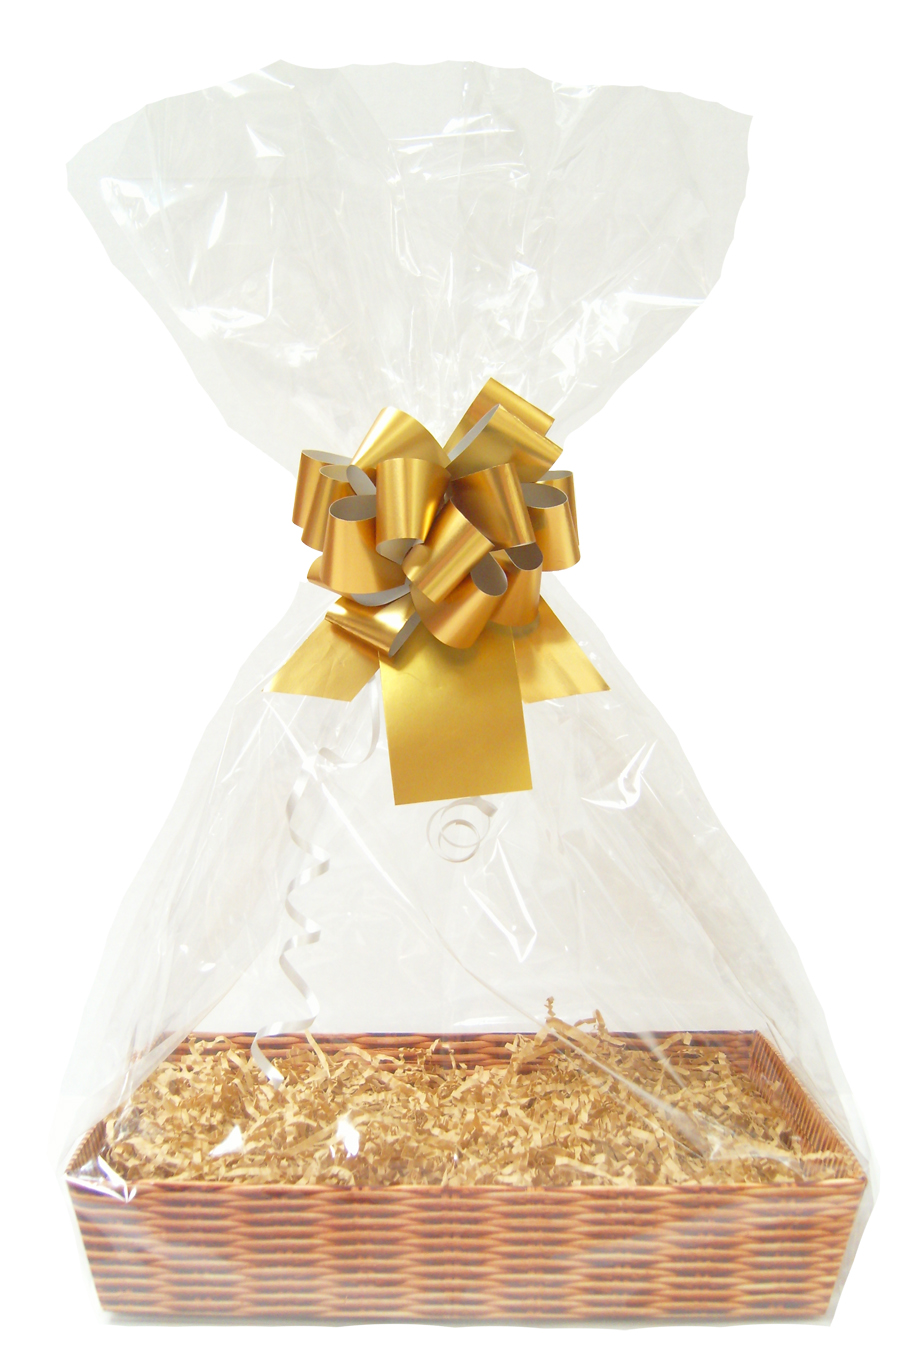 Gift Basket Accessory Kit - 31x21 - GOLD SIZE B  [Basket not included]